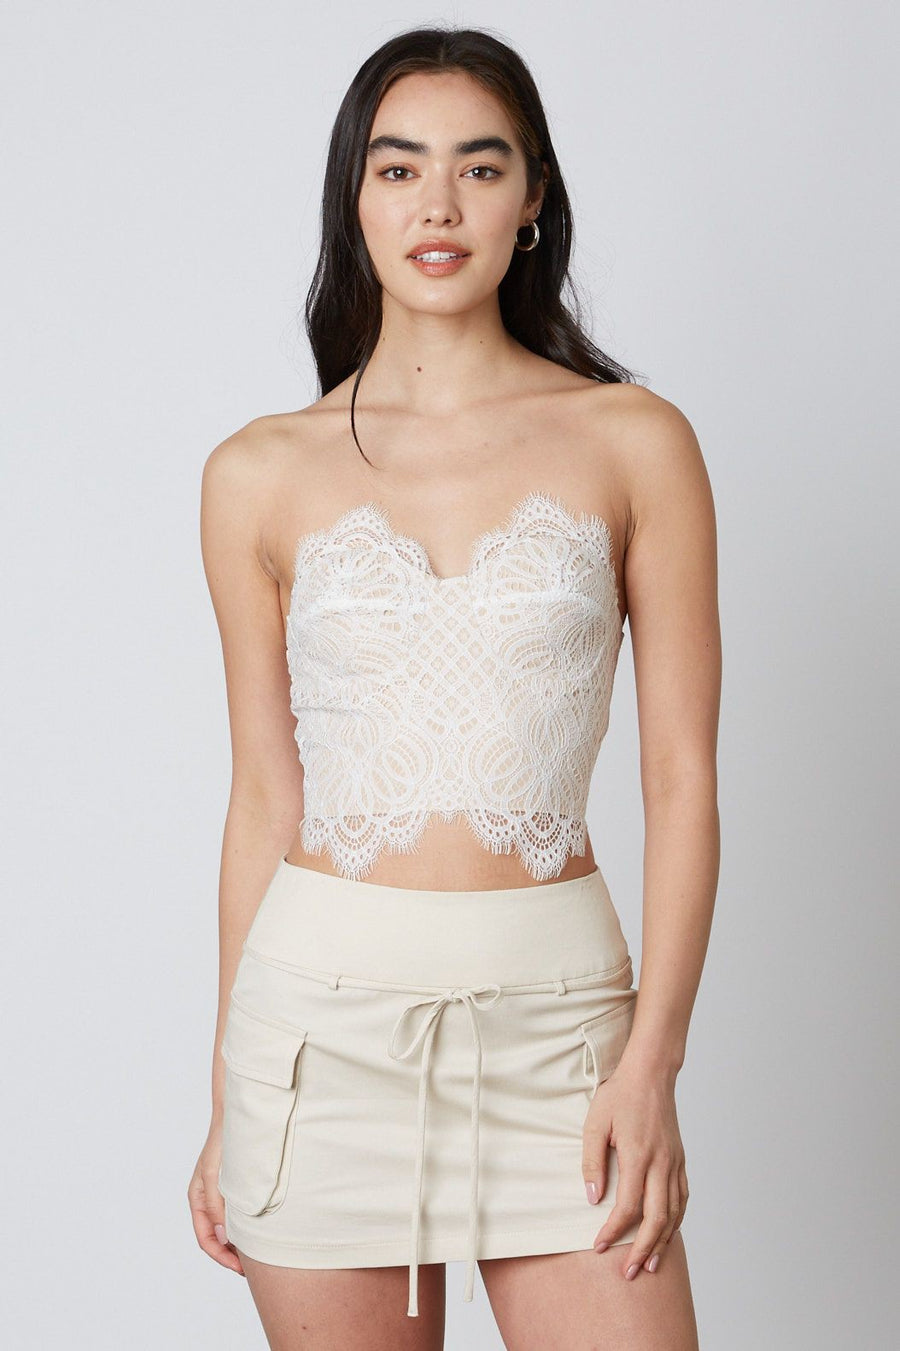 Model is wearing a strapless tube top with lace detail.